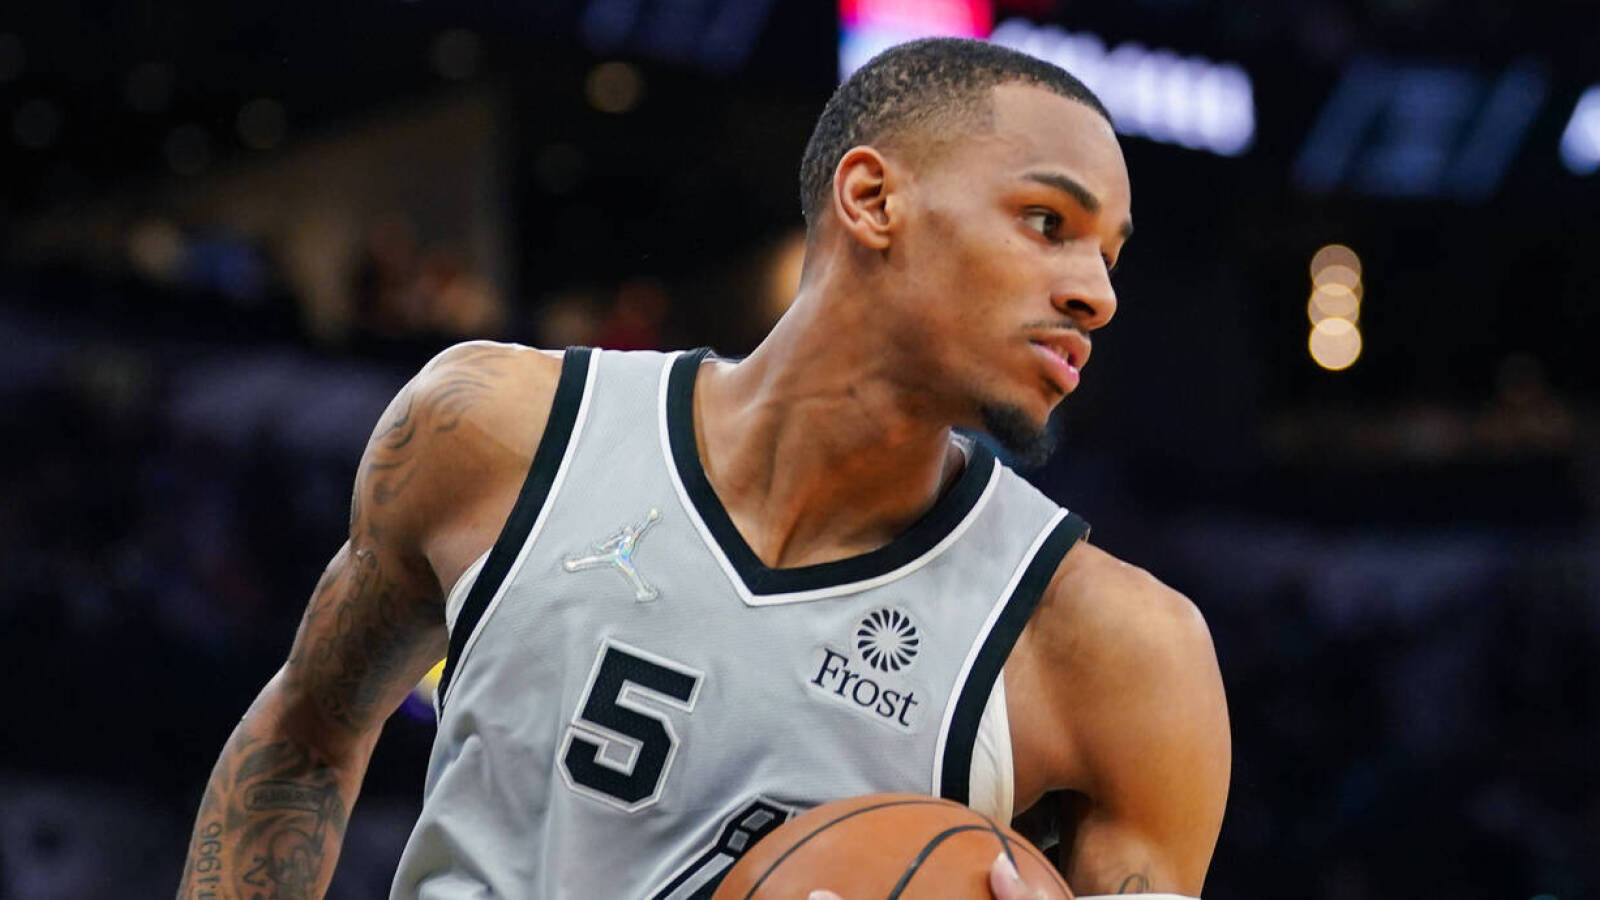 WATCH: Dejounte Murray, Paolo Banchero are feuding following highlight dunk  at pro-am game 